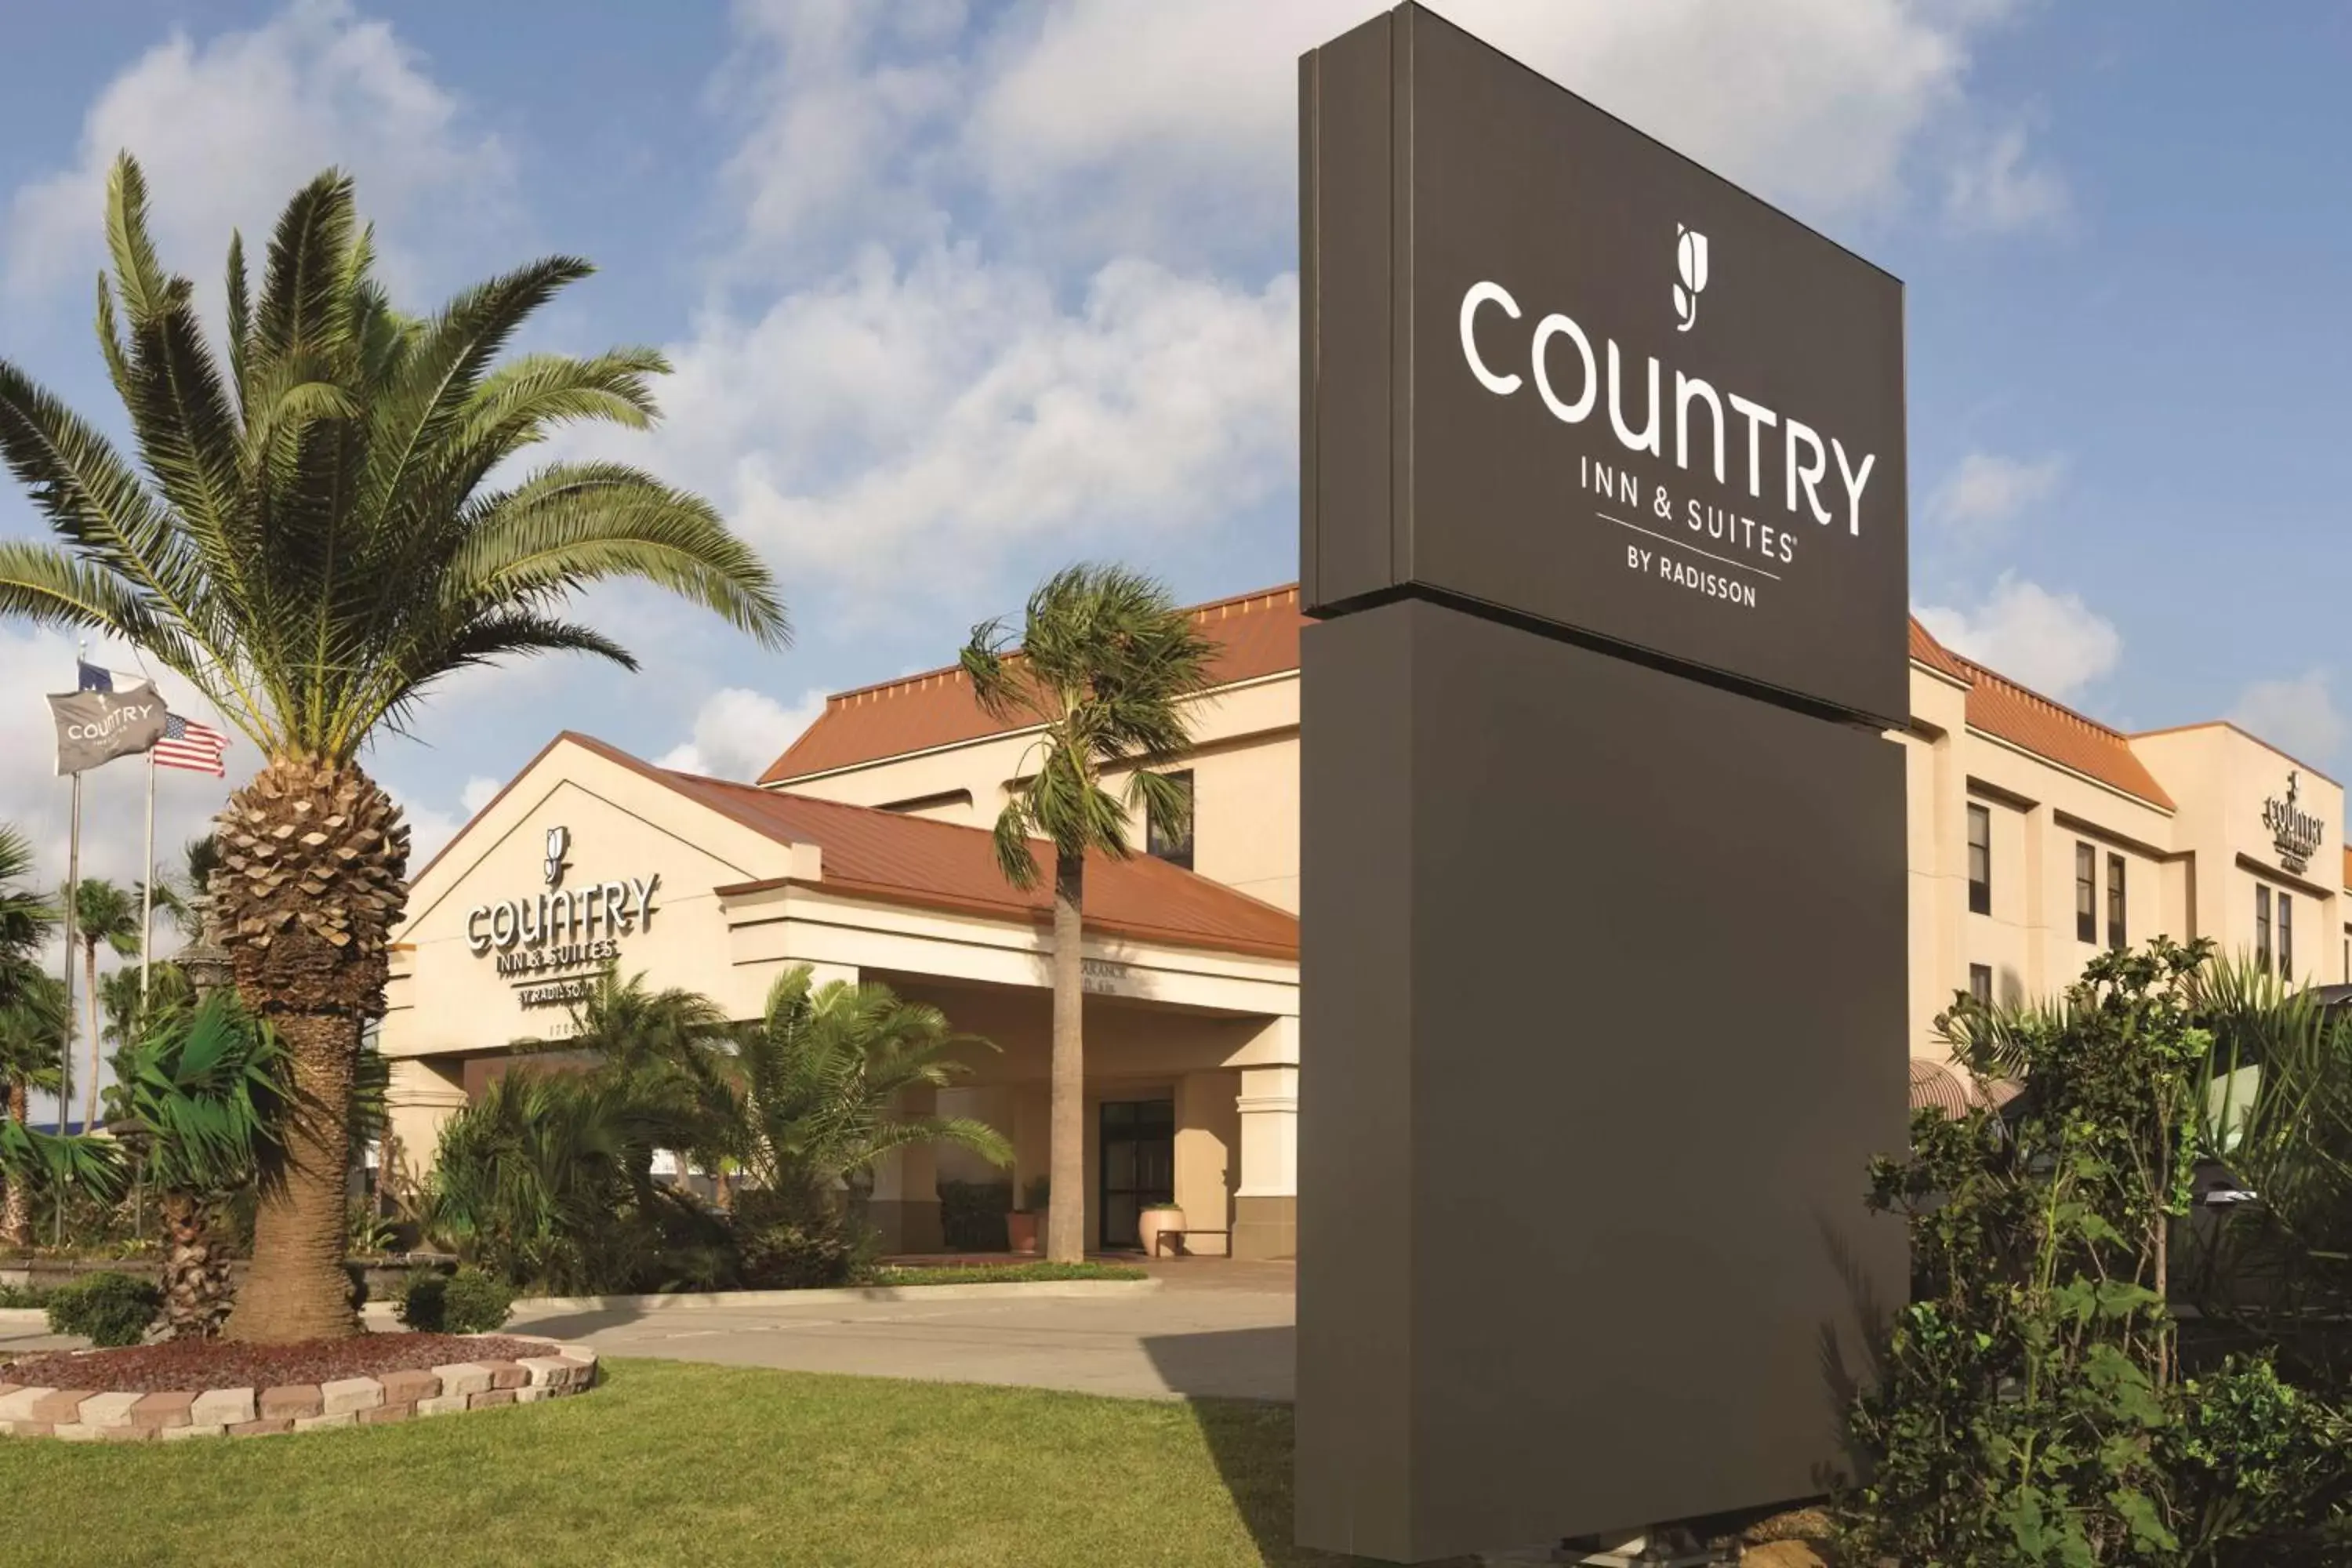 Property Building in Country Inn & Suites by Radisson, Portland, TX